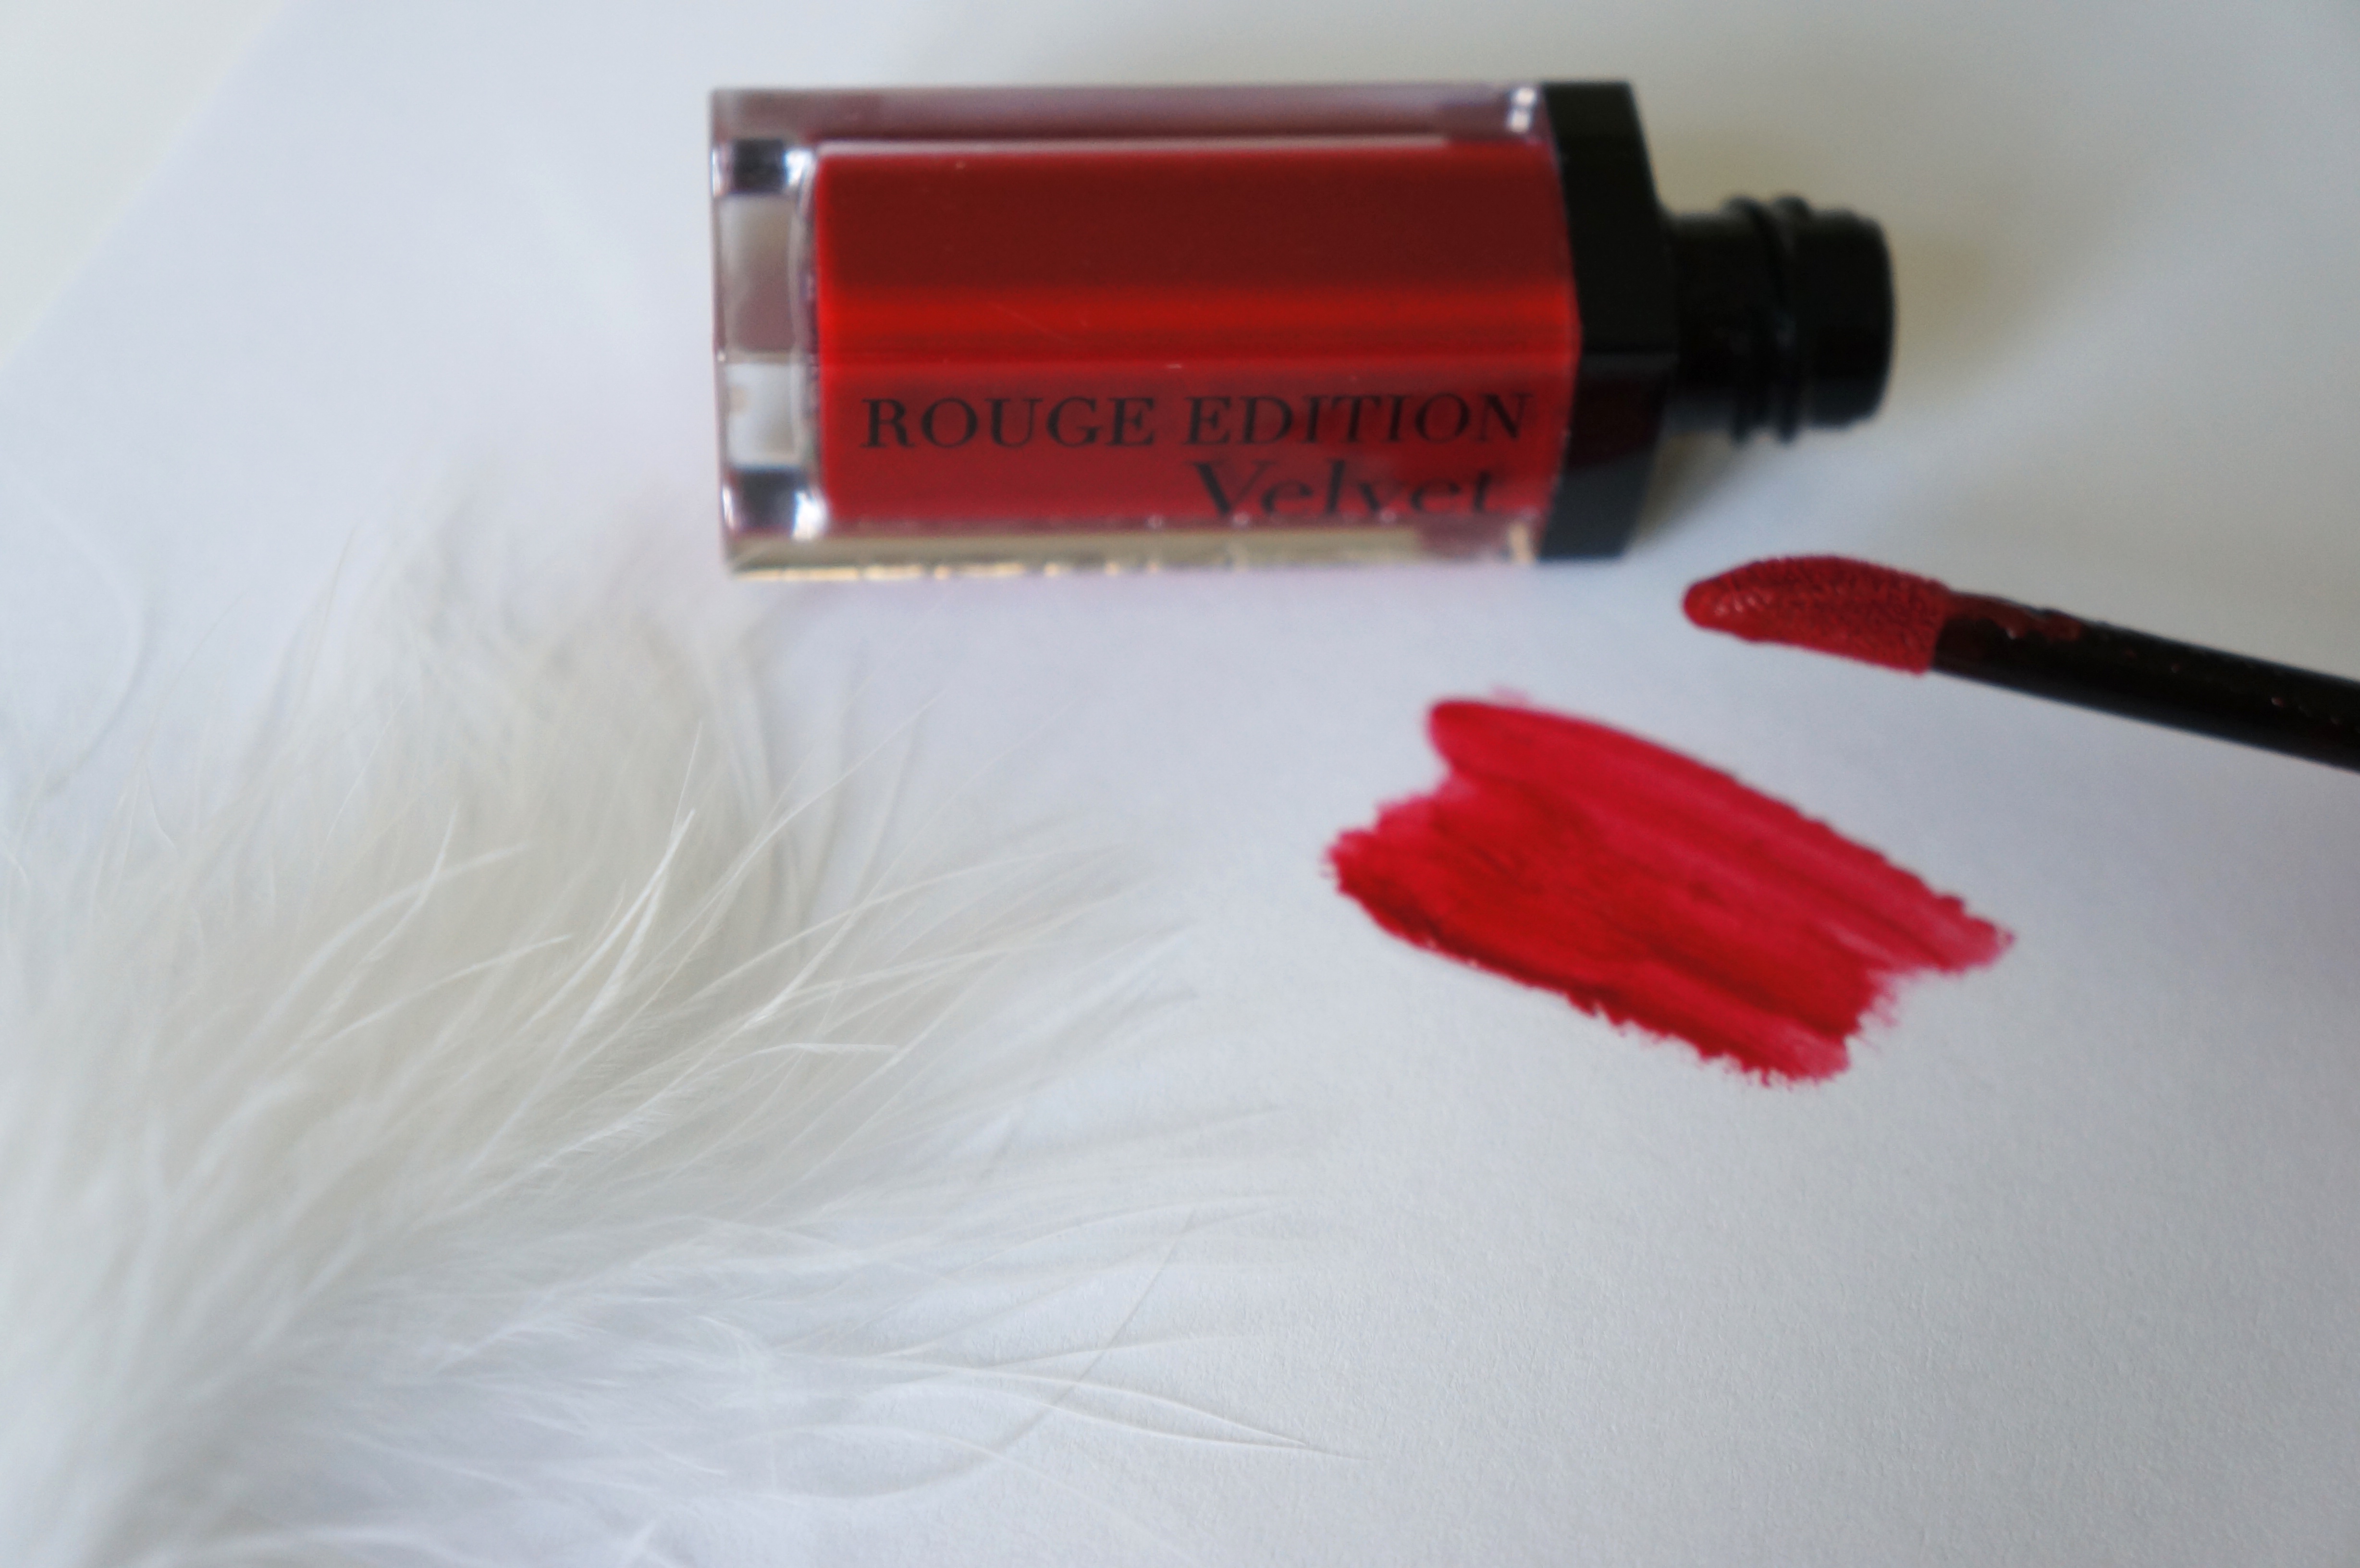 Rouge Edition Velvet in "Red-Volution" by Bourjois/ Pic by 1FDLE.